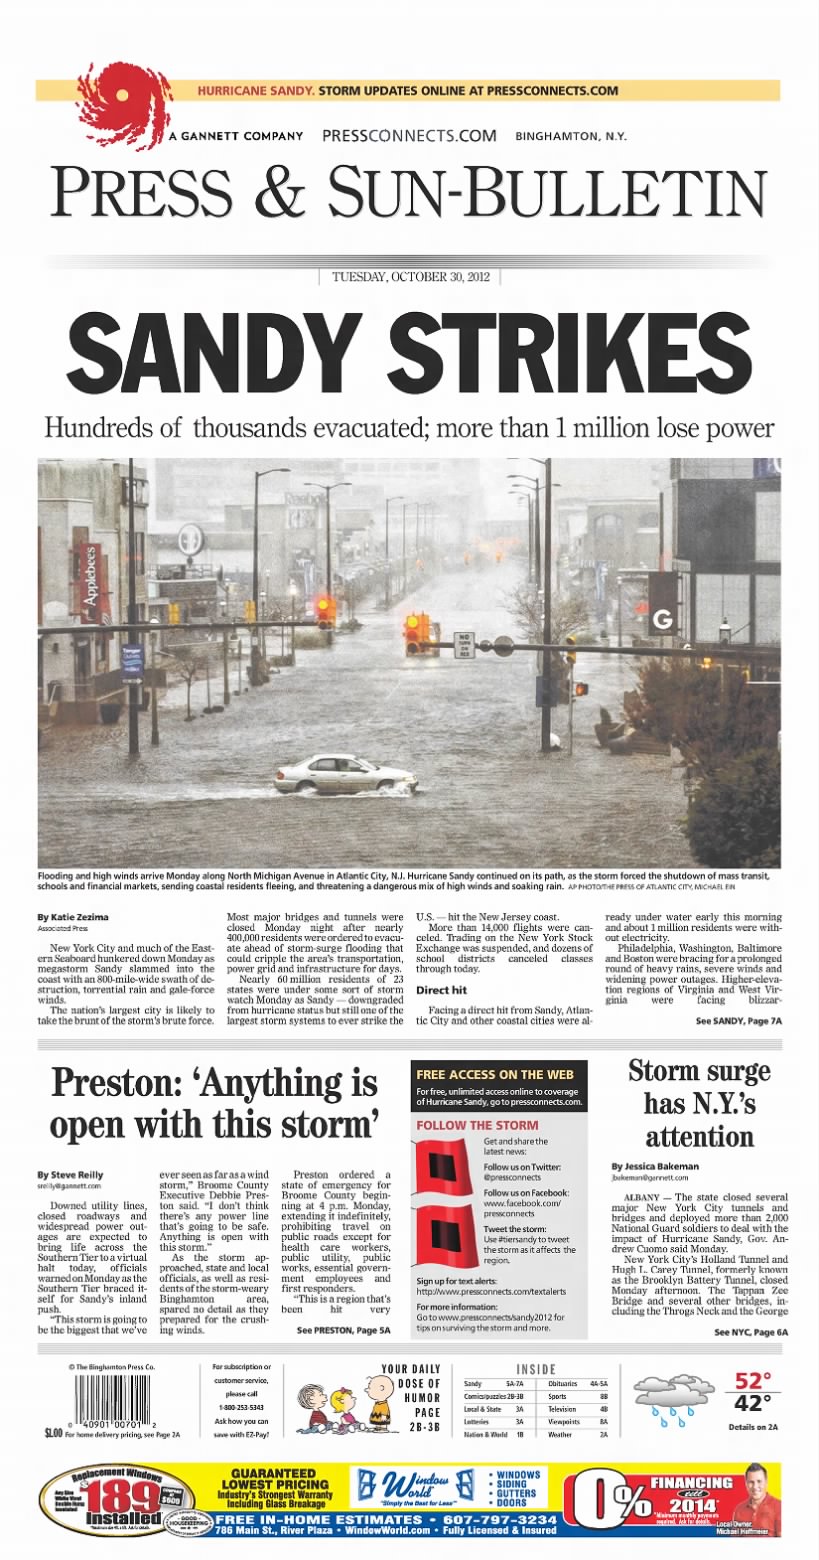 Newspaper front page with coverage and photo from 2012's Hurricane Sandy